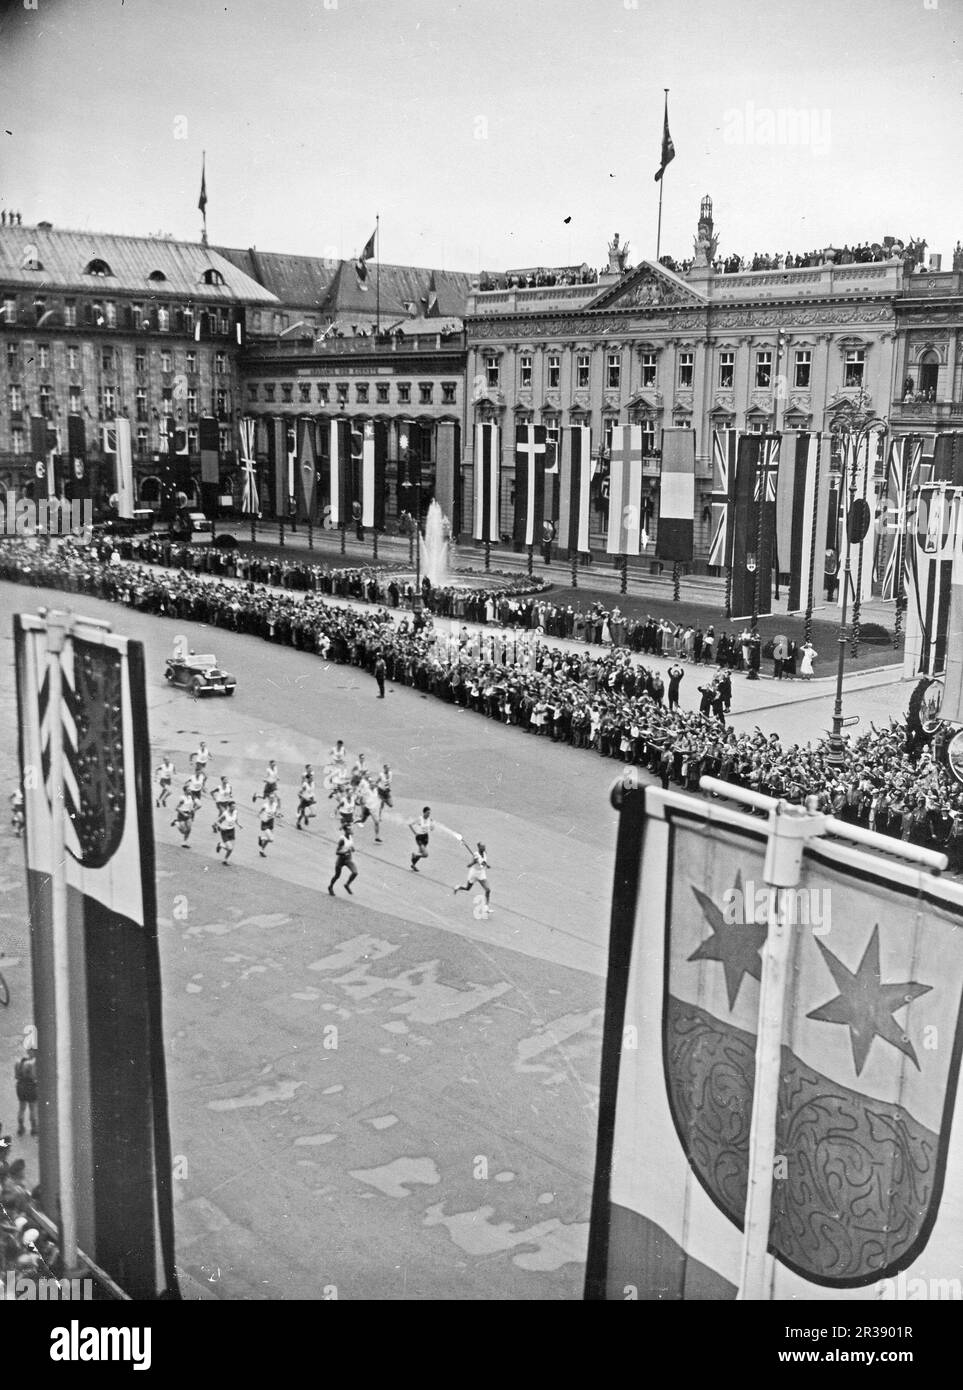 Berlin Olympics 1936. The 1936 Summer Olympics (German: Olympische Sommerspiele 1936), officially known as the Games of the XI Olympiad (German: Spiele der XI. Olympiade) and commonly known as Berlin 1936, were an international multi-sport event held from 1 to 16 August 1936 in Berlin, Germany.  Pictured the olympic flame being transported to the Olympiastadion in Berlin by runners on Pariser strasse in Berlin, about to pass Brandenburger Tor. This ceremony is called Olympic torch relay. Stock Photo